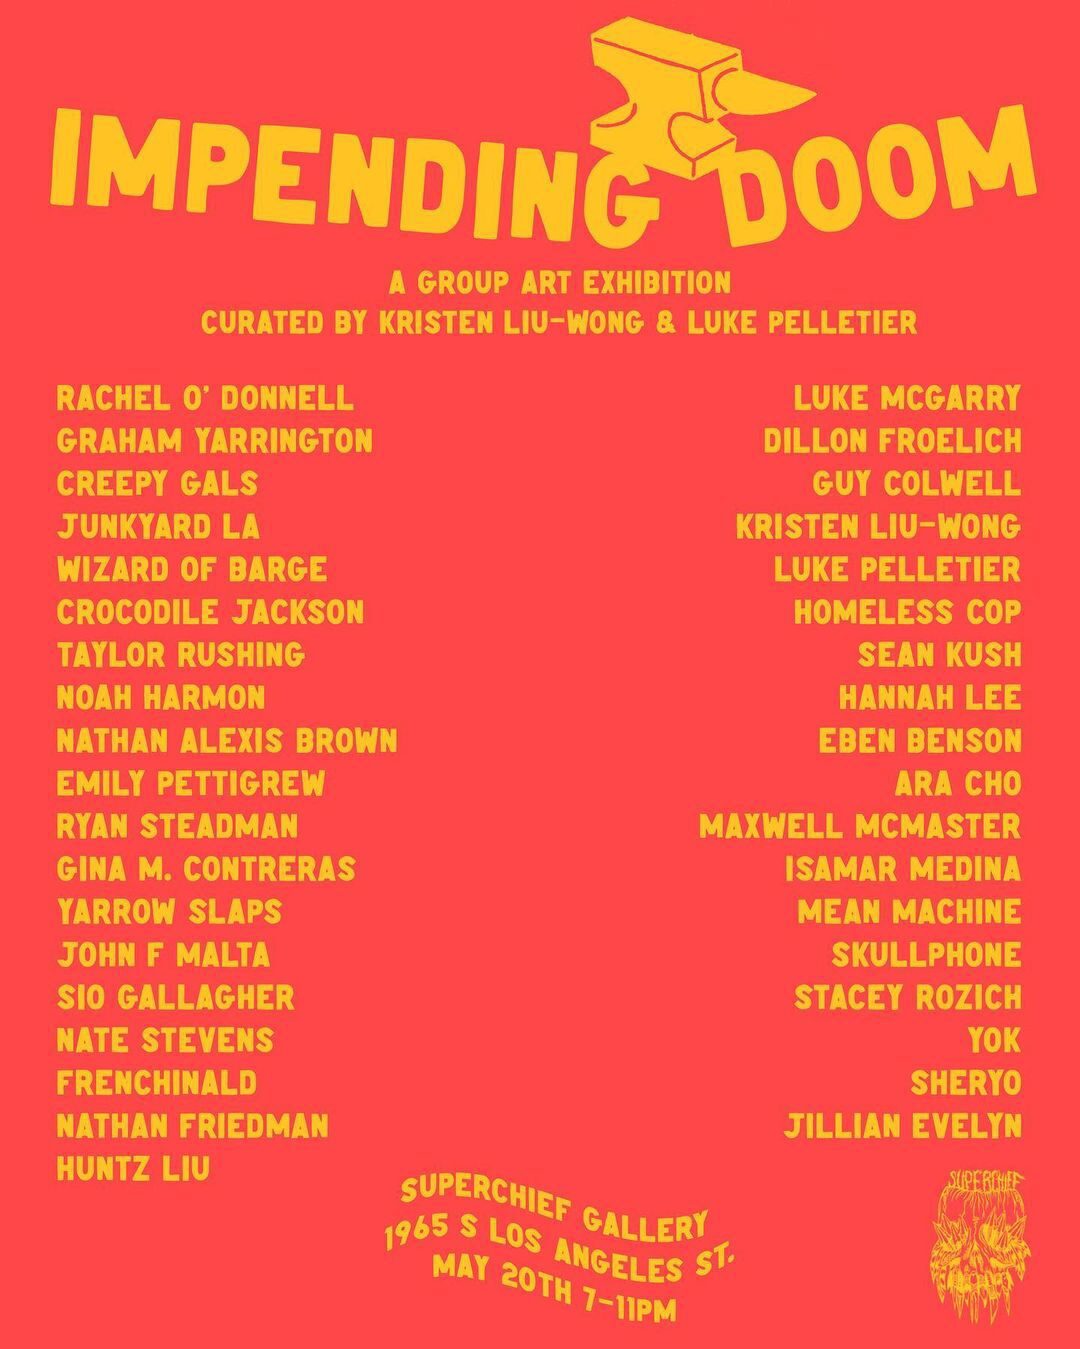 IMPENDING DOOM opens May 20th in LA